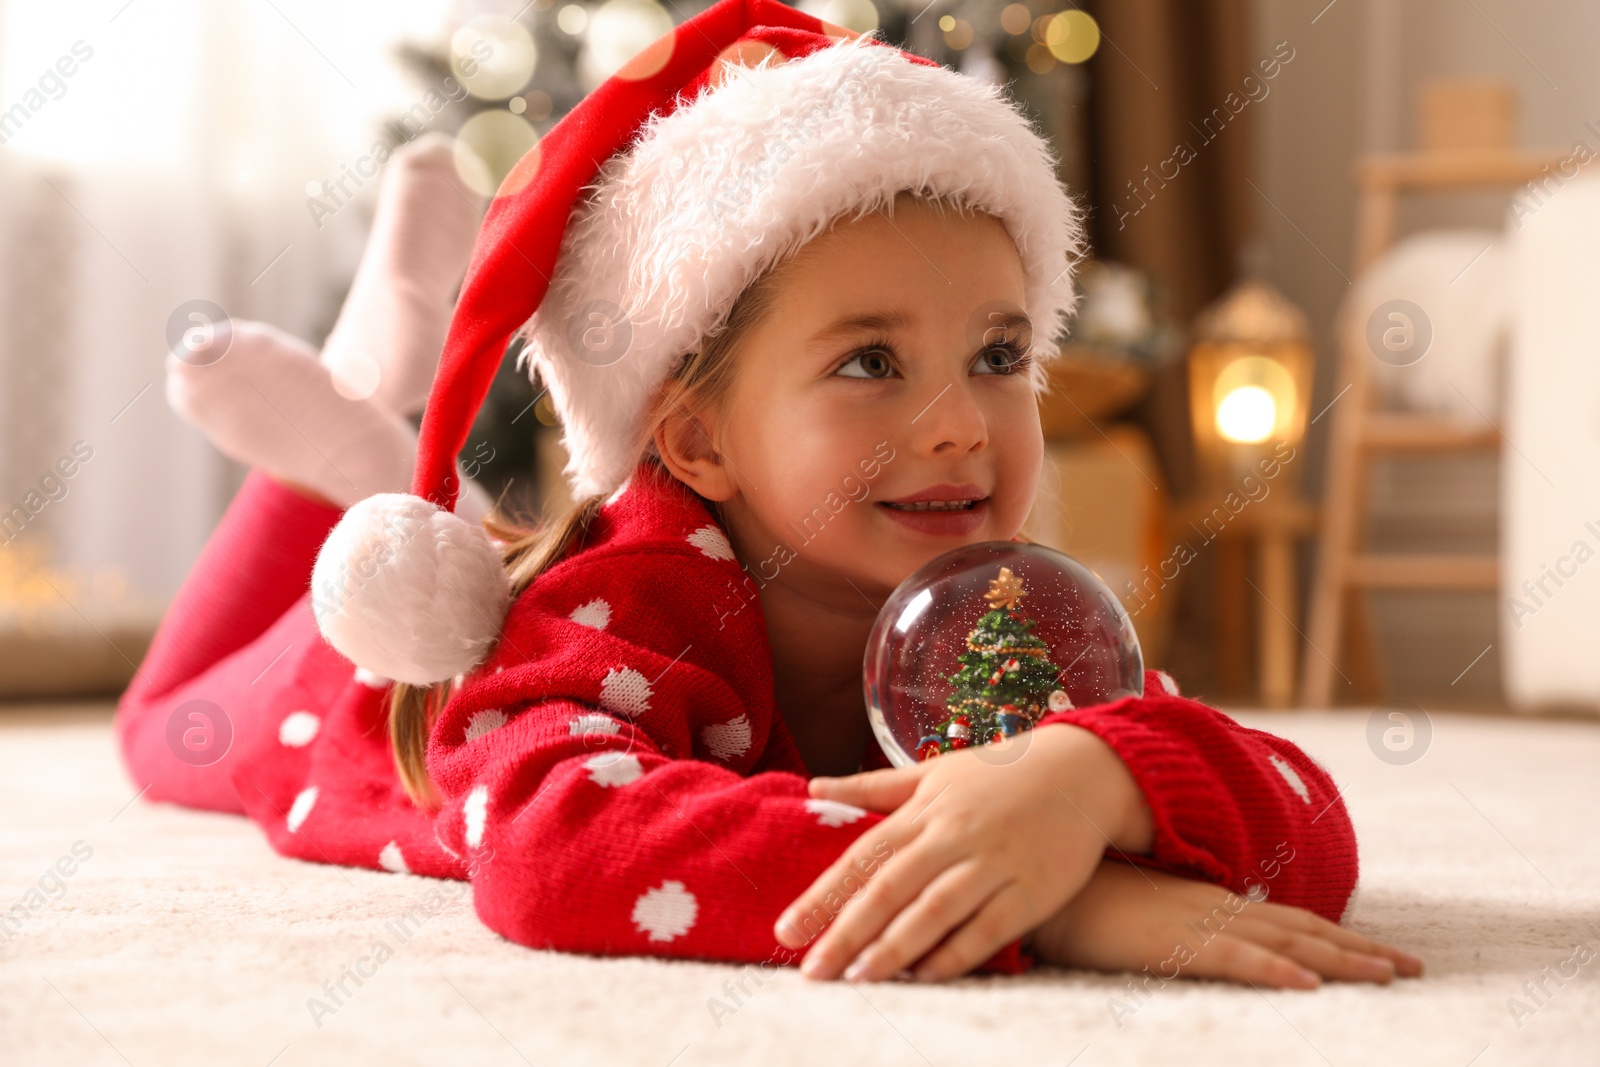 Photo of Little girl in Santa hat playing with snow globe on floor